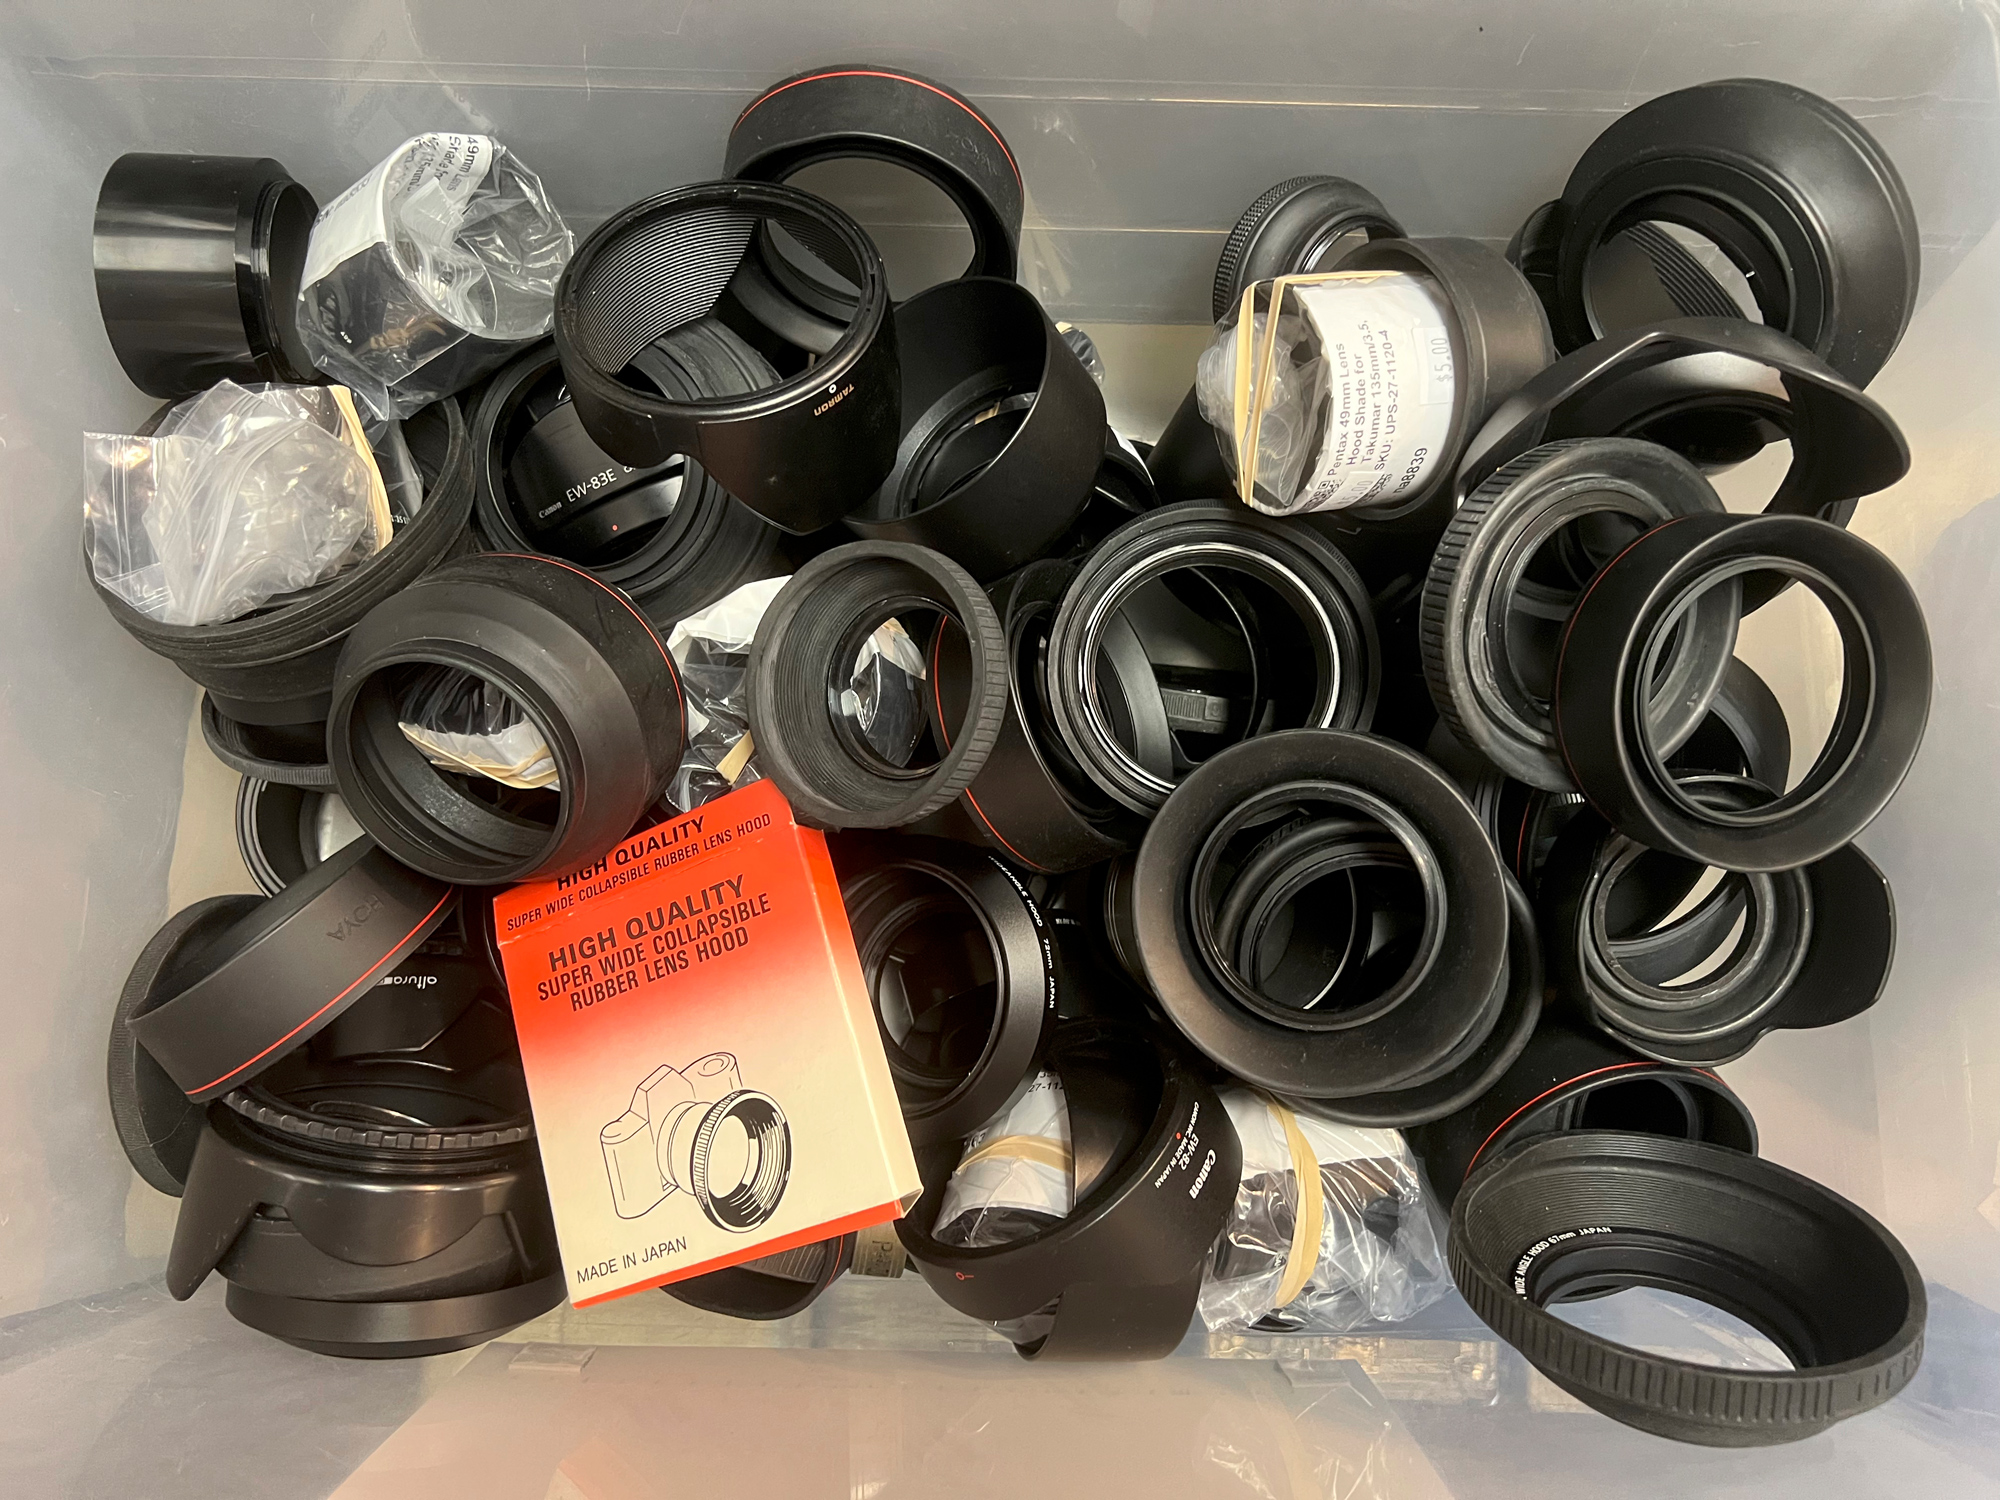 Boxes of lens shades